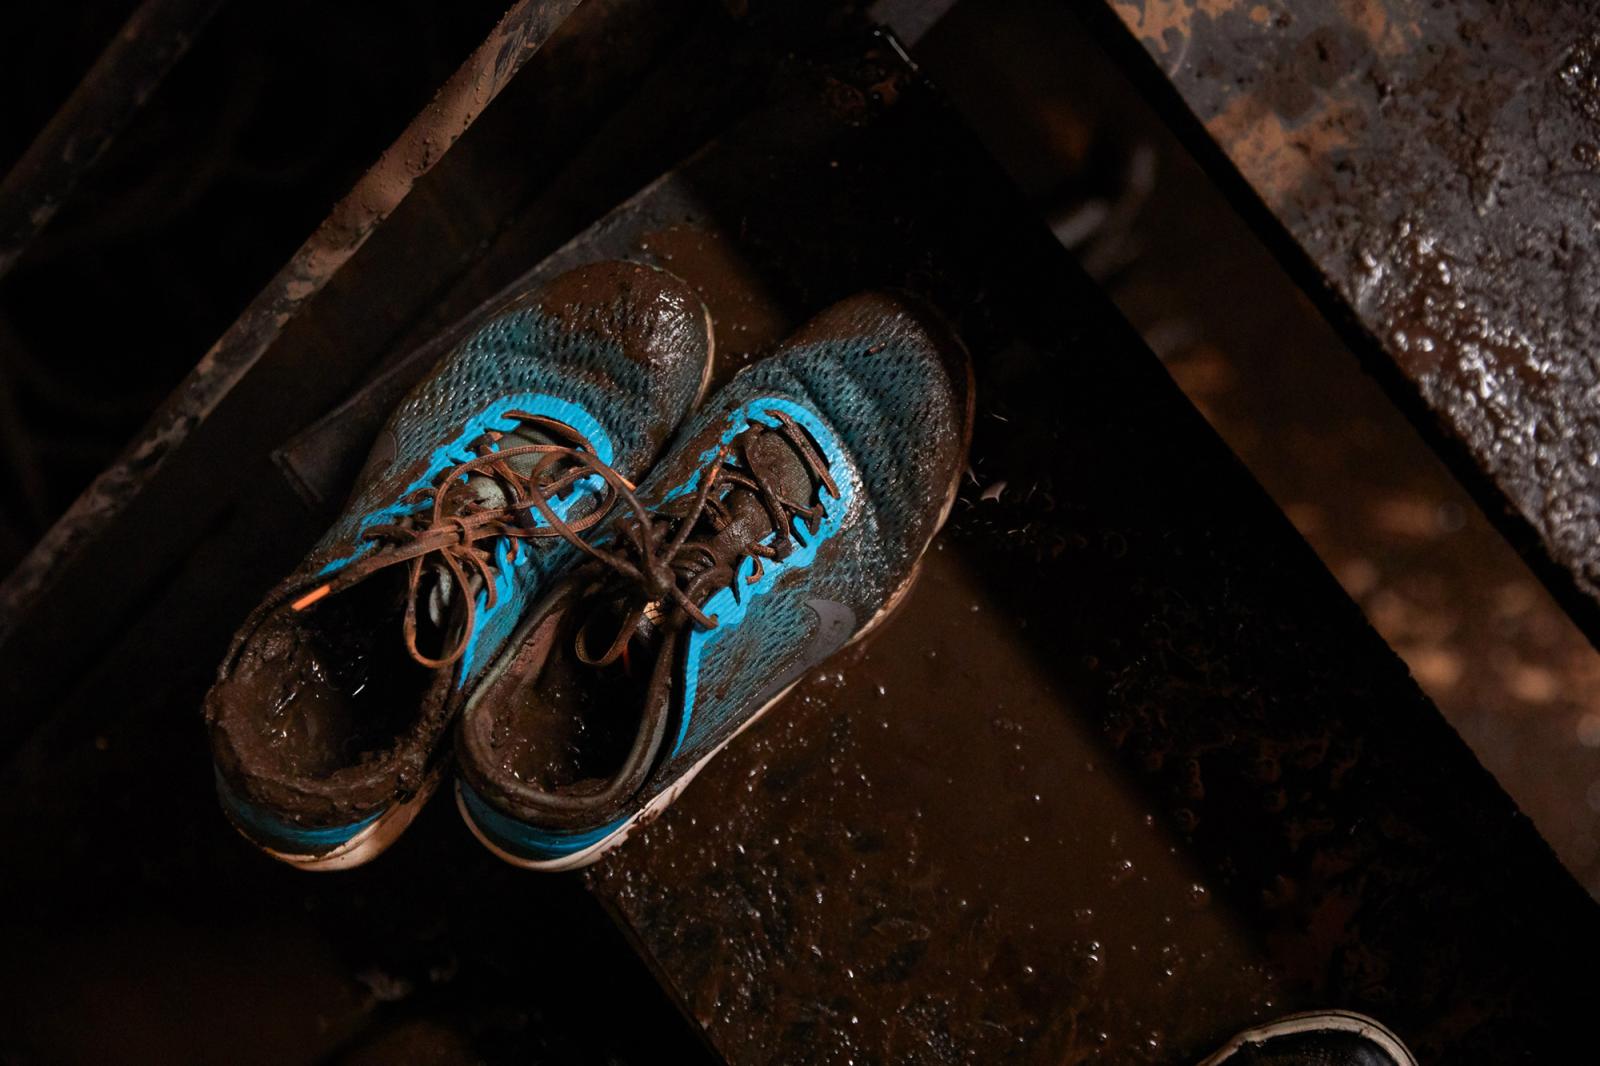 Detail of muddy shoes after a m...Ecuador, Tuesday, Feb. 1, 2022.